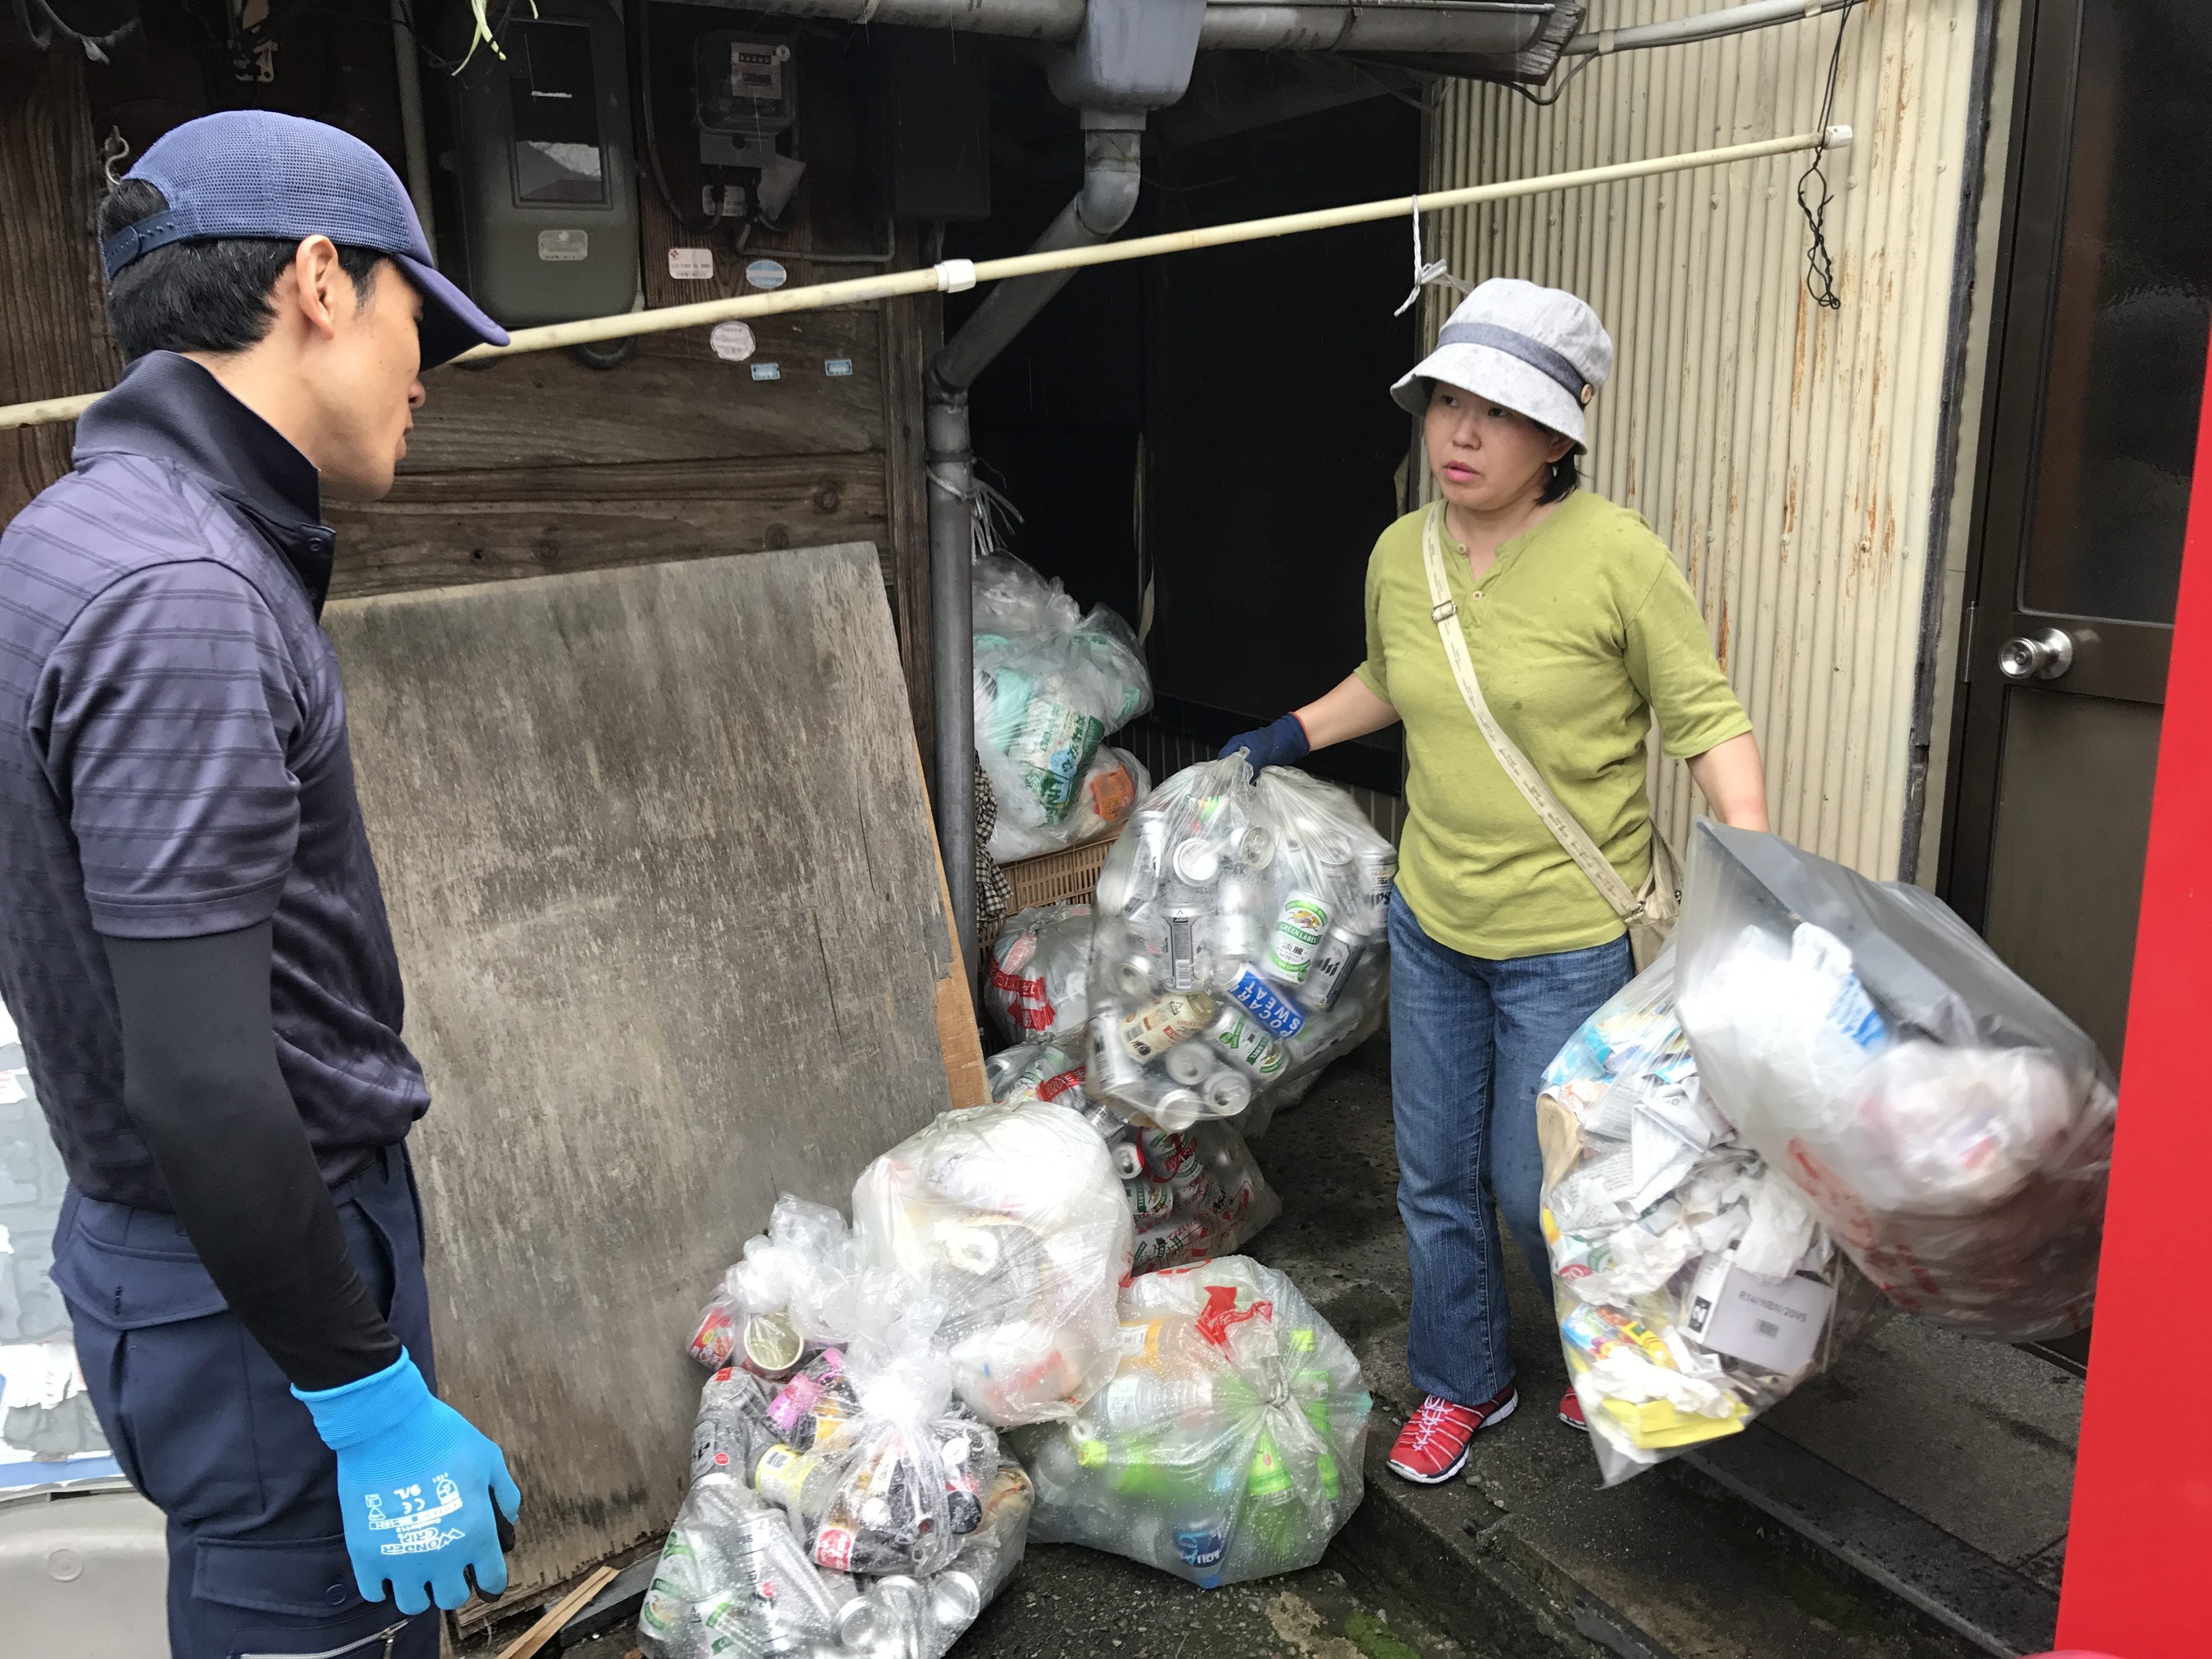 https://whyy.org/wp-content/uploads/2018/10/Photo-8_Recycling-Truck-Pickup-2-e1539891328644.jpg